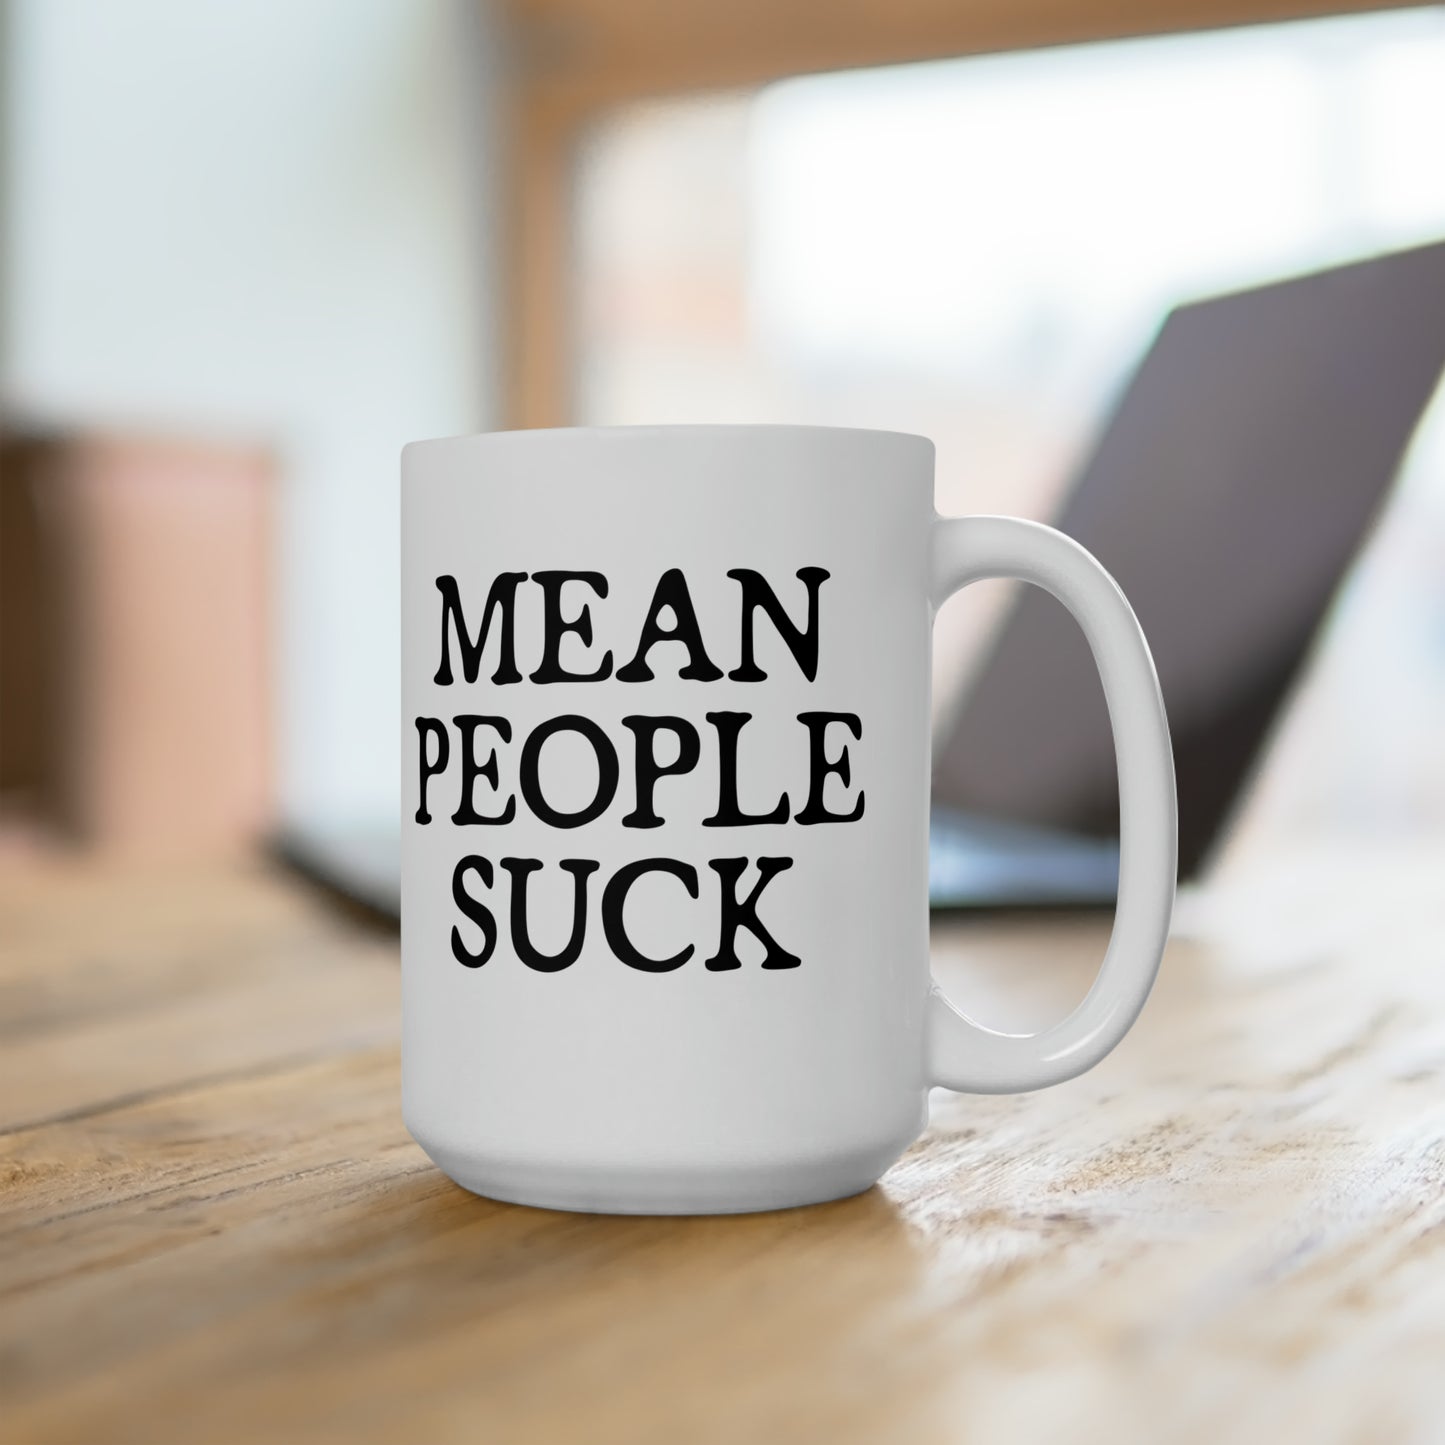 Mean People Suck Coffee Mug For Sarcastic Hot Tea Cup For Funny Gift Idea